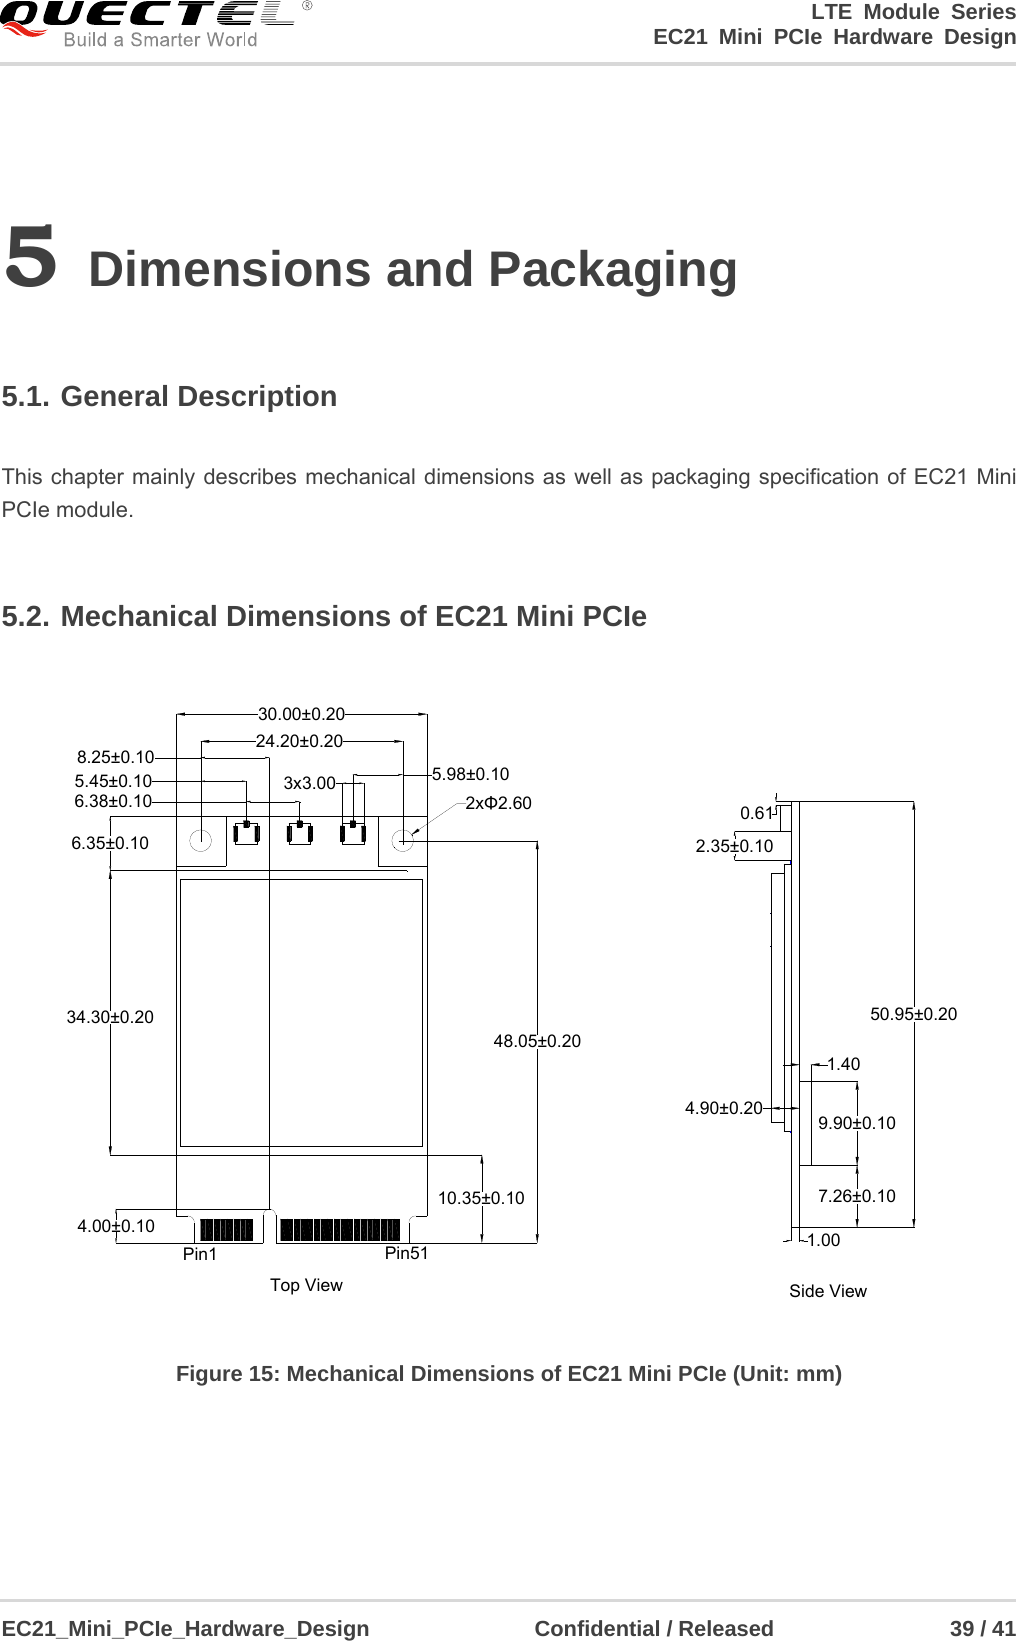                                                                        LTE Module Series                                                            EC21 Mini PCIe Hardware Design  EC21_Mini_PCIe_Hardware_Design               Confidential / Released                39 / 41    5 Dimensions and Packaging  5.1. General Description  This chapter mainly describes mechanical dimensions as well as packaging specification of EC21 Mini PCIe module.  5.2. Mechanical Dimensions of EC21 Mini PCIe 10.35±0.1034.30±0.204.00±0.1048.05±0.206.35±0.103x3.00 5.98±0.106.38±0.105.45±0.108.25±0.10 24.20±0.2030.00±0.20Pin1 Pin51 1.007.26±0.109.90±0.101.404.90±0.200.612.35±0.1050.95±0.20Top View Side View2xΦ2.60 Figure 15: Mechanical Dimensions of EC21 Mini PCIe (Unit: mm)    